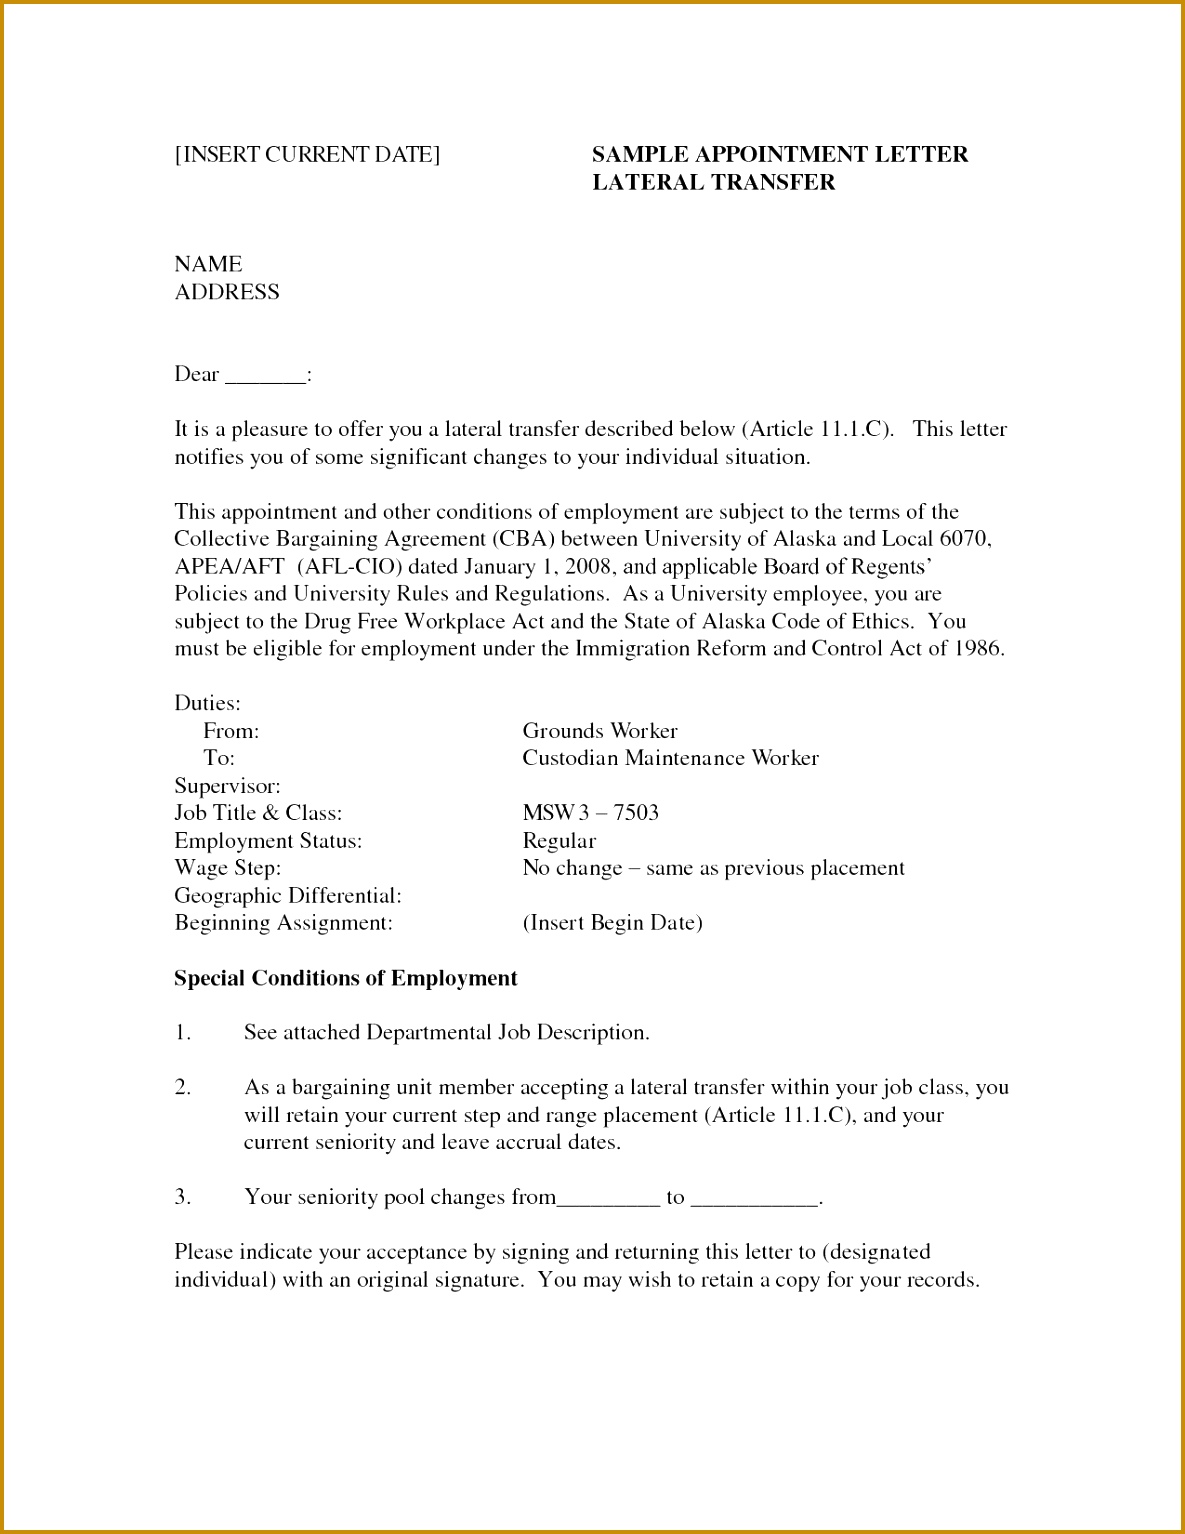 Gallery of 20 Public Relations Cover Letter 11851534